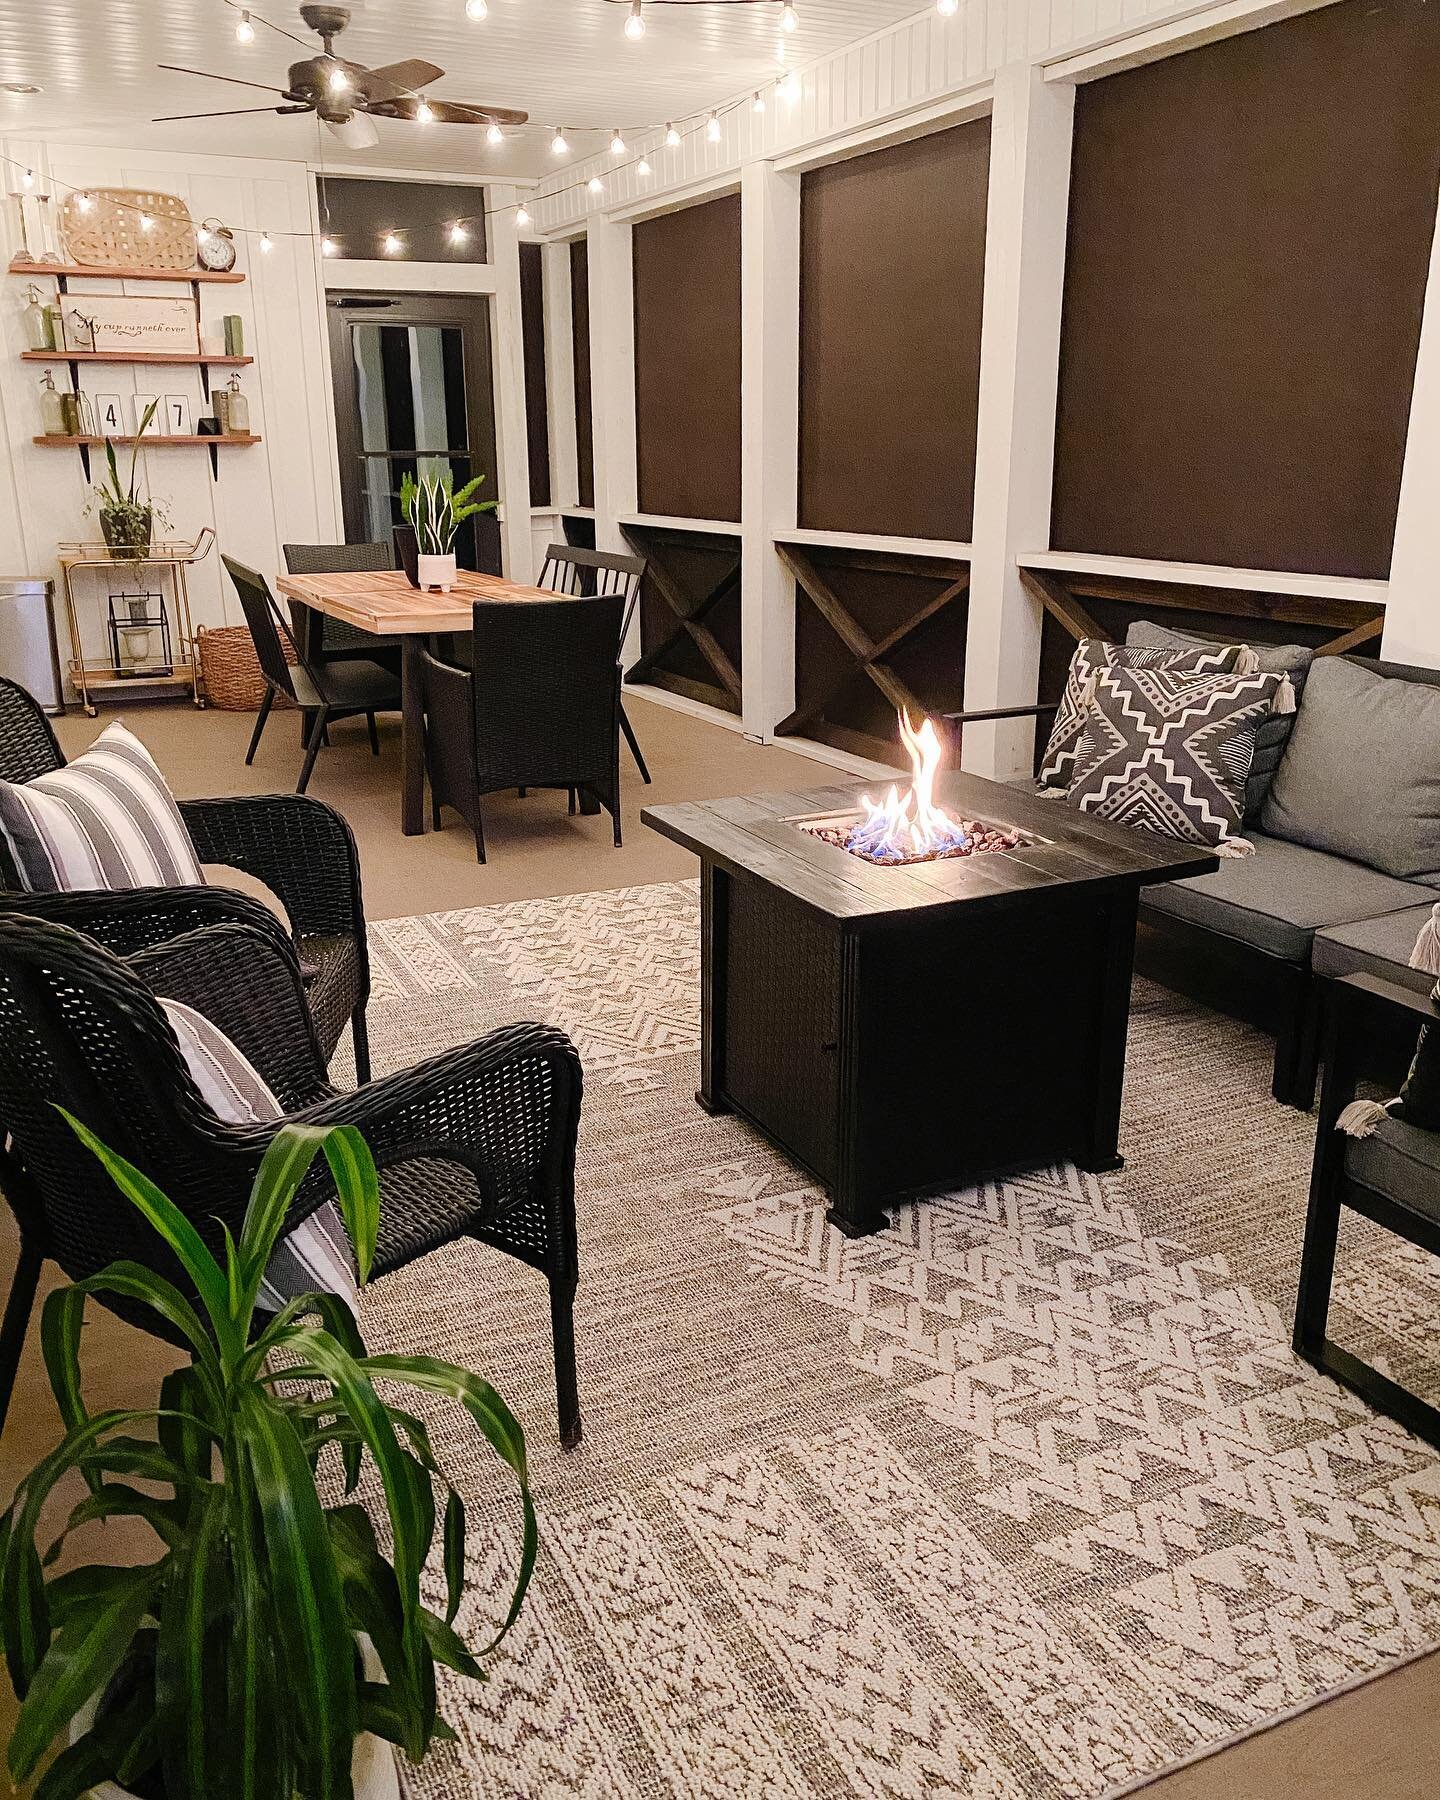 Friday night lights around here! So excited for it to be perfectly cool tonight to light the fire pit and sit on the porch. This is my favorite space. Especially this time of year! I hope you guys have a amazing weekend and because this rug is amazin